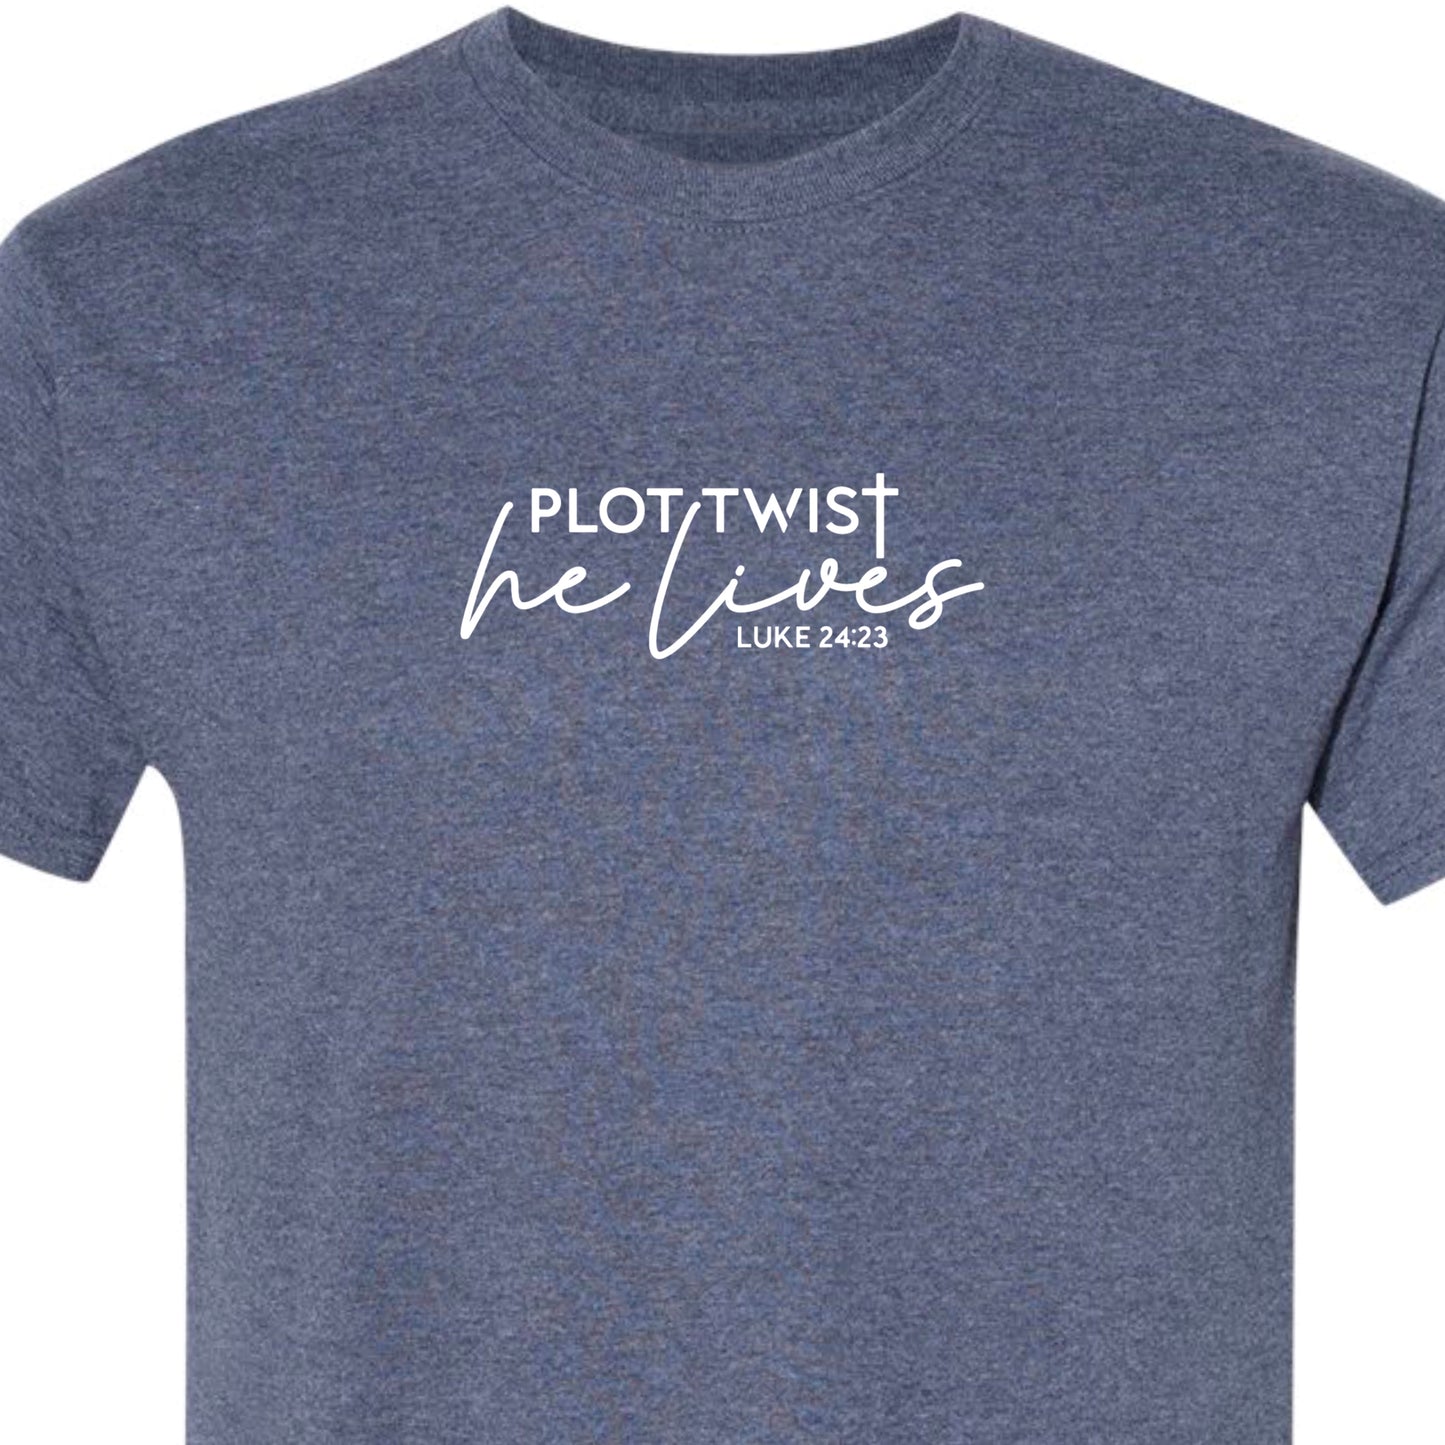 Heather navy adult tshirt that reads, in white lettering: Plot Twist, He Lives - Luke 24:23